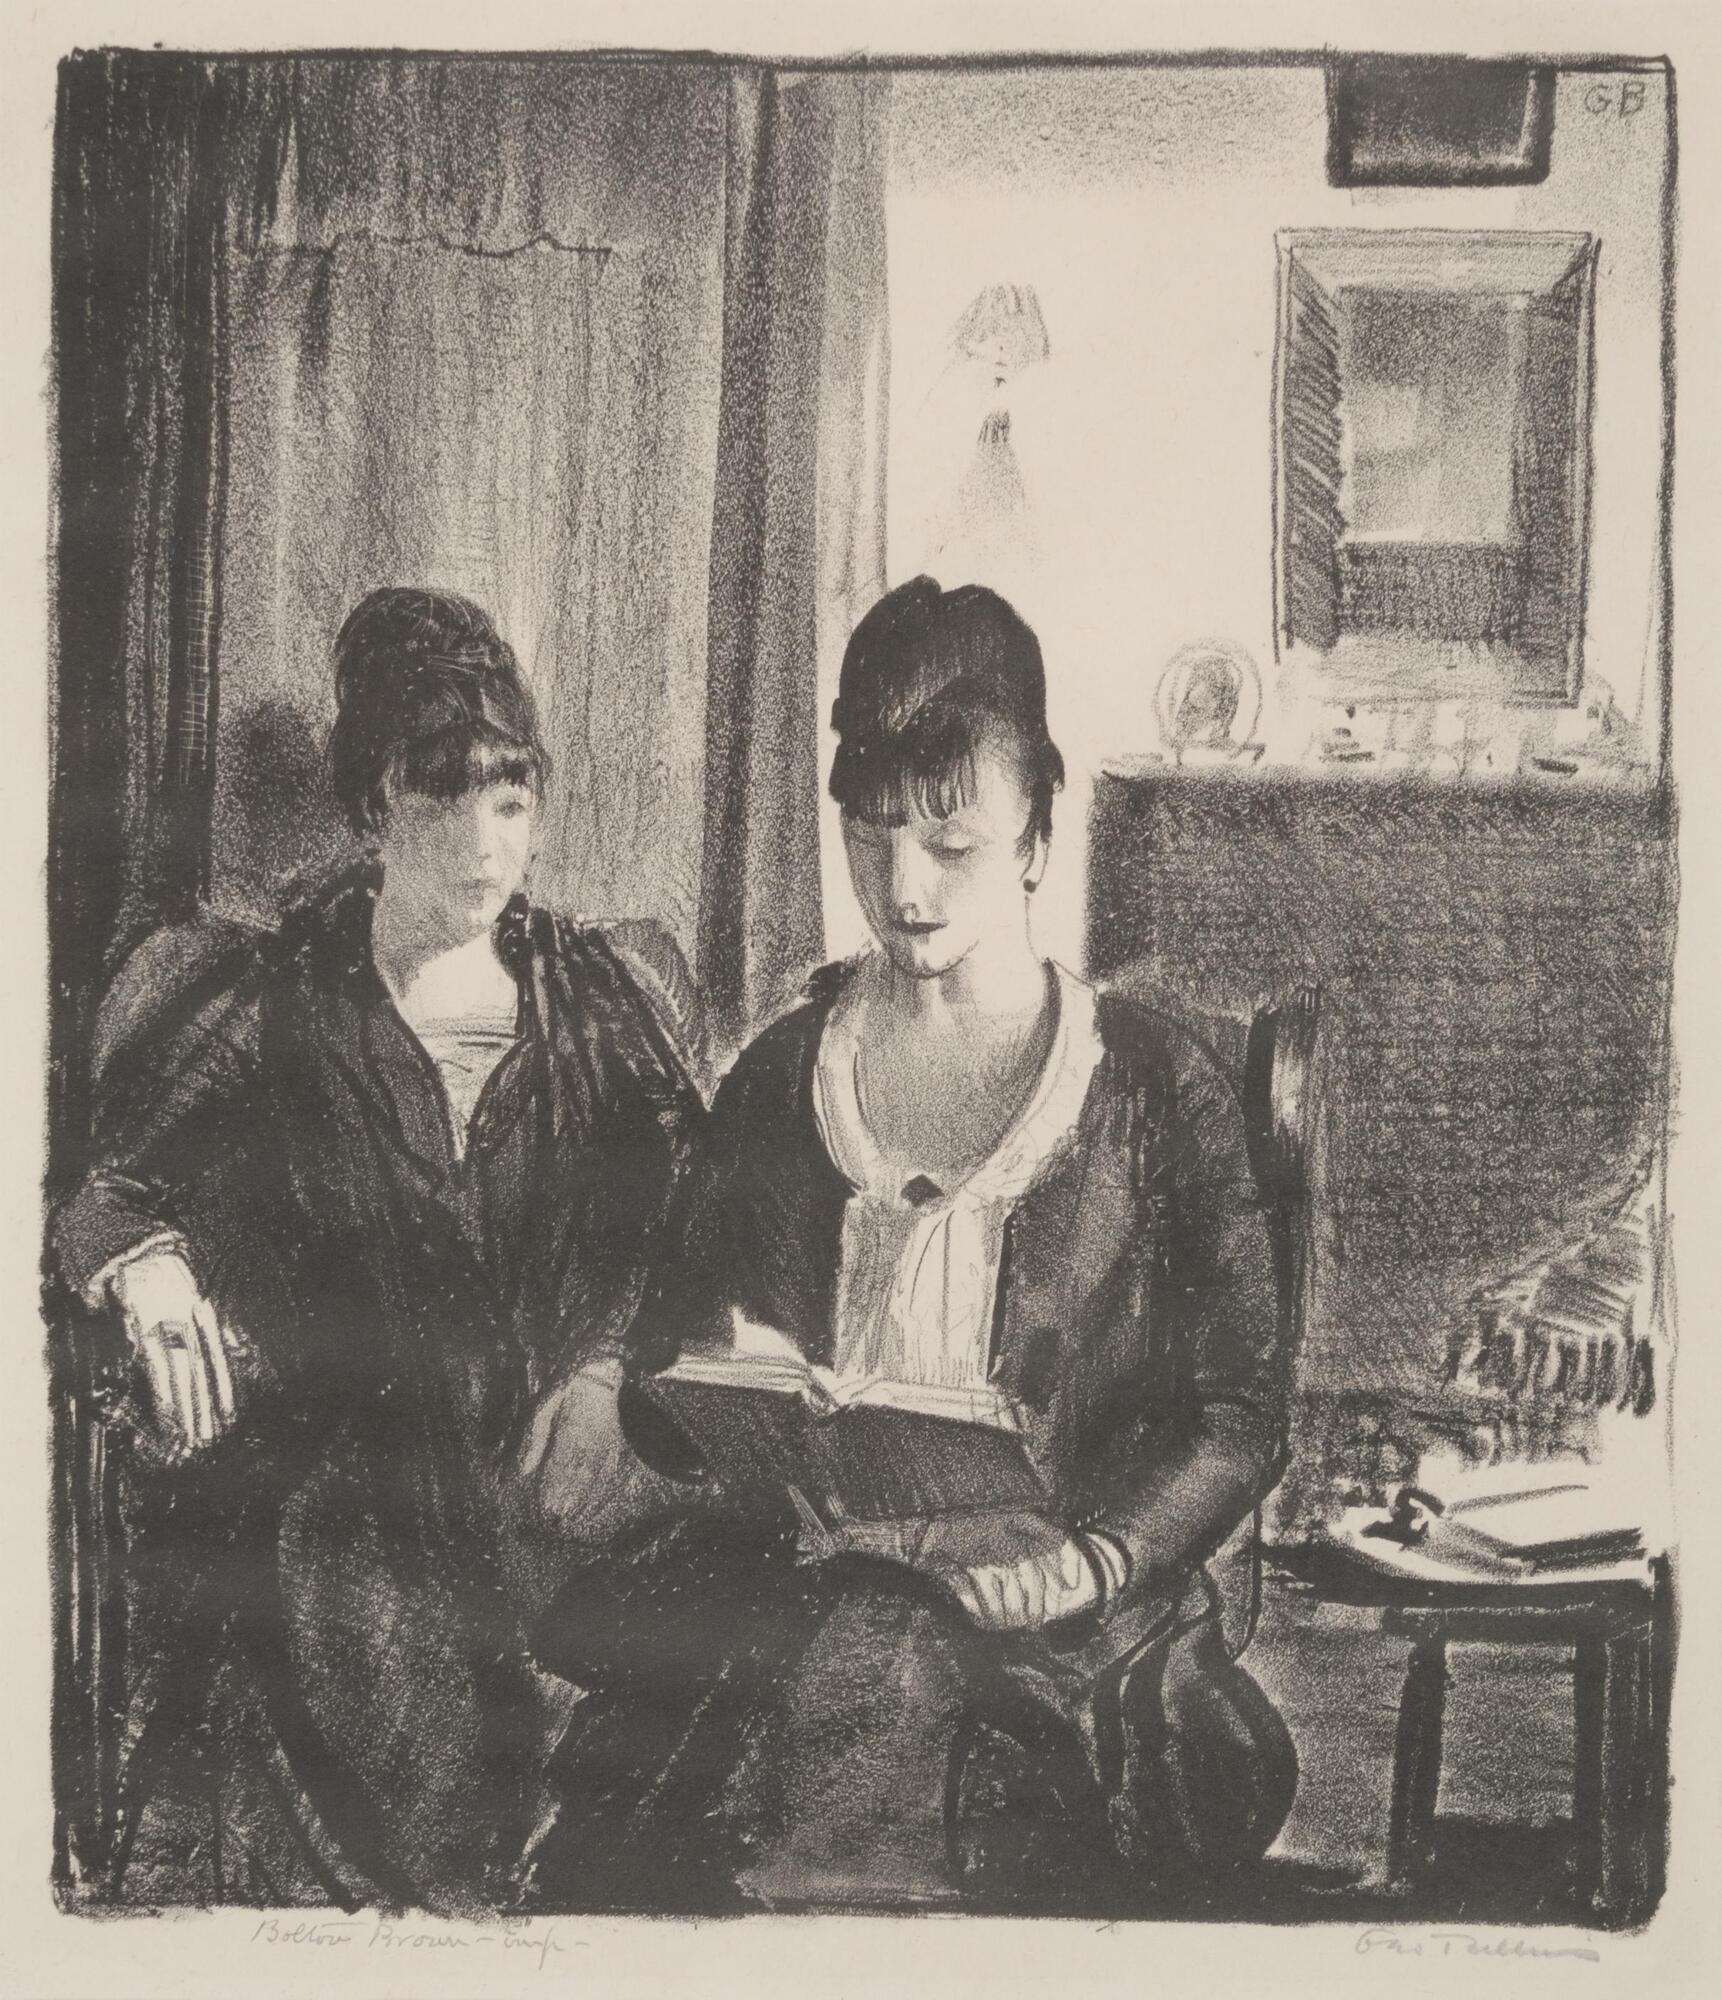 Two women seated, one reading to the other. Both wearing long formal dresses.